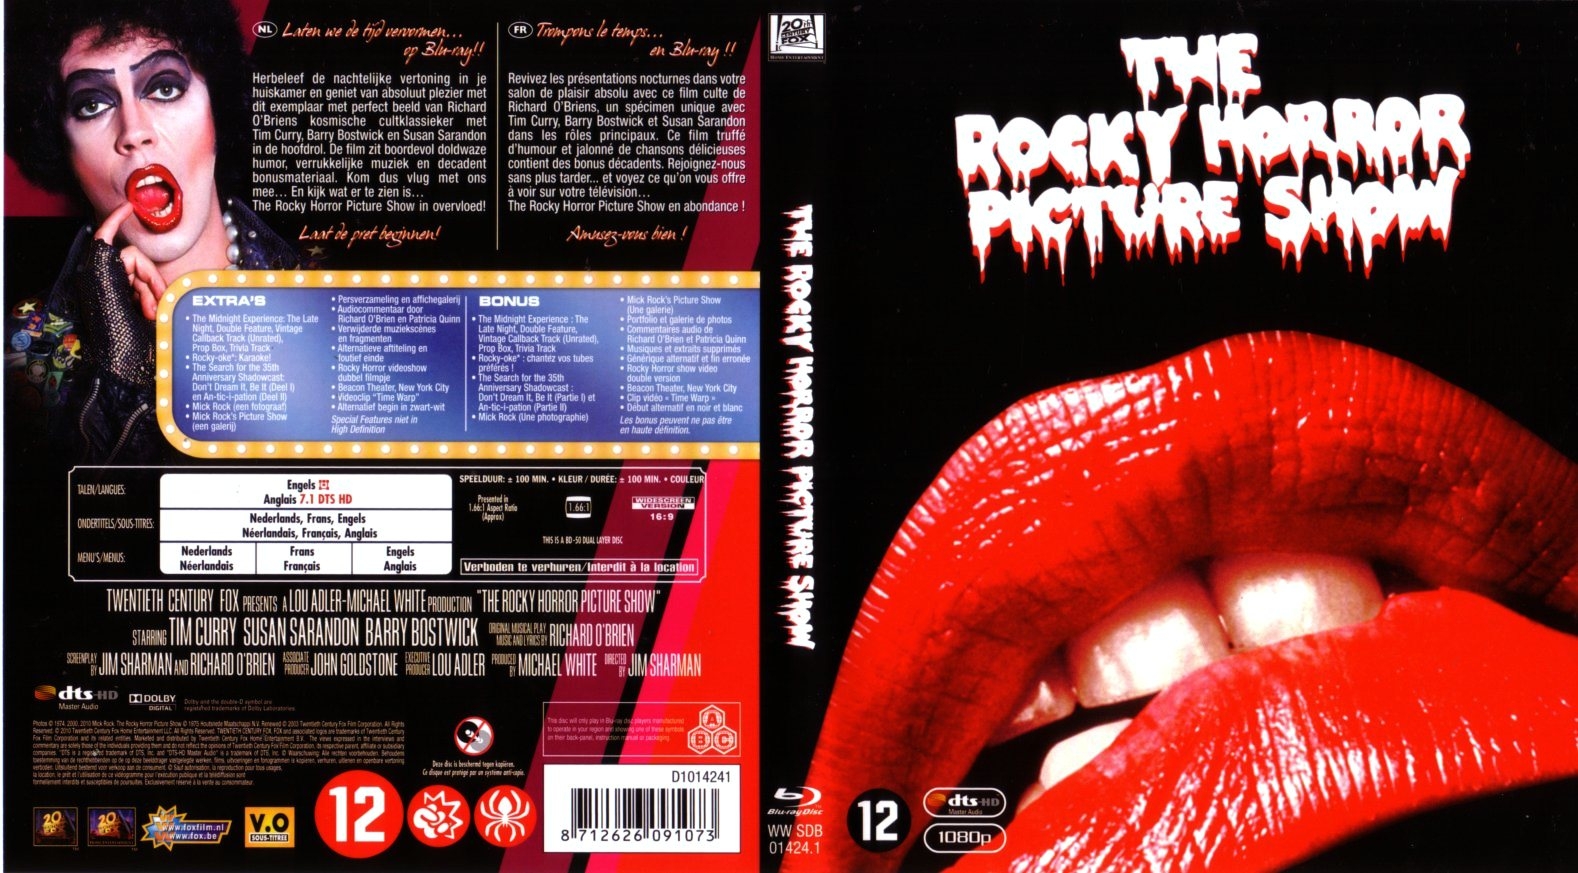 Jaquette DVD The rochy horror picture show (BLU-RAY)